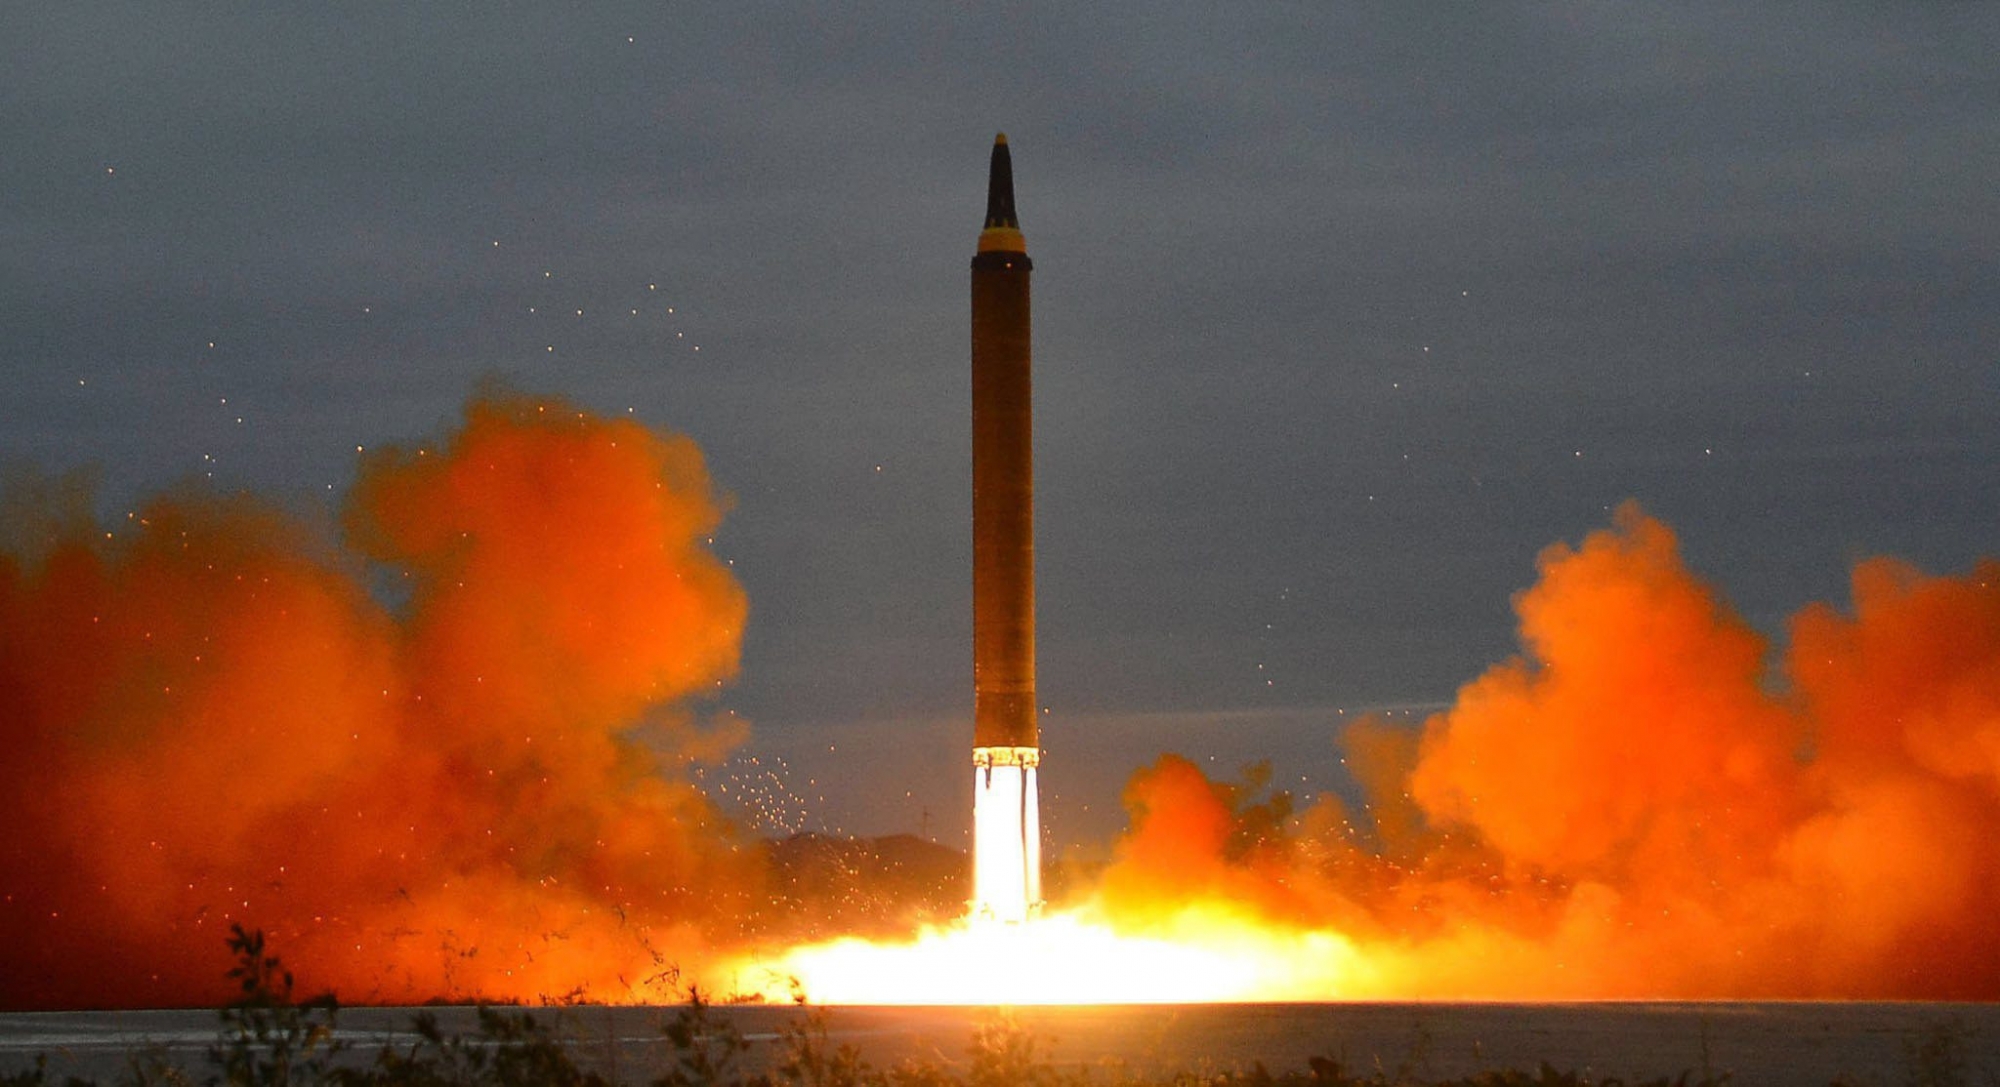 epa06356316 (FILE) - A photo released by the North Korean Central News Agency (KCNA), the state news agency of North Korea, shows an intermediate-range strategic ballistic rocket being launched during a drill at an undisclosed location in North Korea, 29 August 2017 (reissued 28 November 2017). According according to media reports on 28 November 2017, North Korea has fired another ballistic missile, the South Korean news agency Yonhap reported that the missile flew eastward from Pyongsong, South Pyongan province. Tokyo news reports stated that the missile was fired eastwards from the hermit state and landed about 210km west of Japan's Kyurokujima island.  EPA/KCNA   EDITORIAL USE ONLY (FILE) NORTH KOREA MISSILE LAUNCH